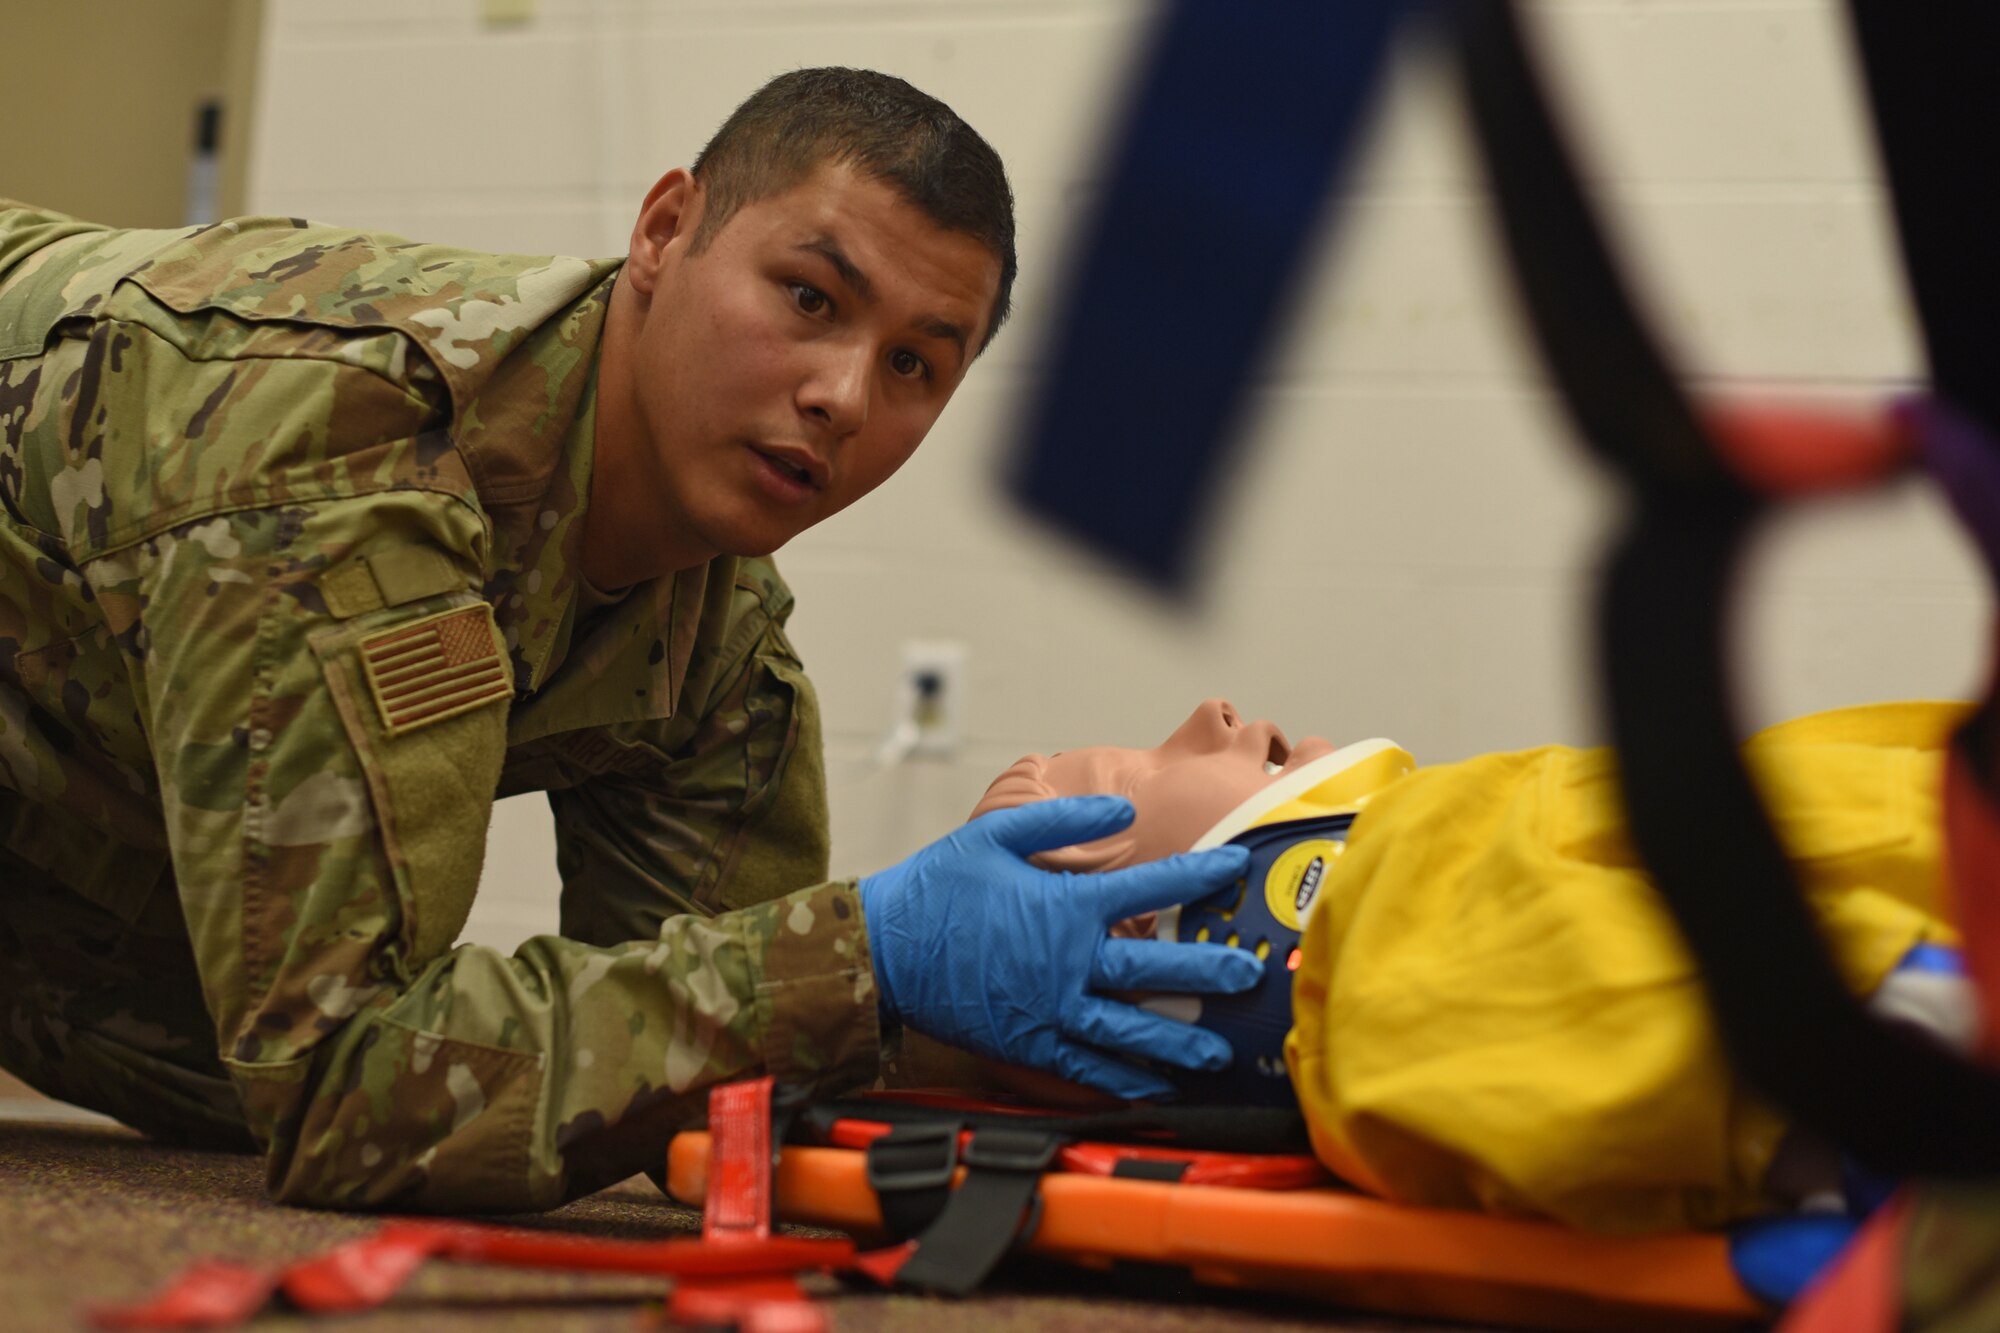 U.S. Air Force Airman Alec Almendarez, 312th Training Squadron student, verbalizes to his simulated victim that his partner is preparing straps to secure the simulated victim to a longboard for transportation to a hospital, during an Emergency Medical Responder psychomotor skills evaluation at Goodfellow Air Force Base, Texas, May 6, 2022. EMR psychomotor skills evaluation had 27 evaluation areas with patient communication considered a critical area in the assessment. (U.S. Air Force photo by Senior Airman Abbey Rieves)